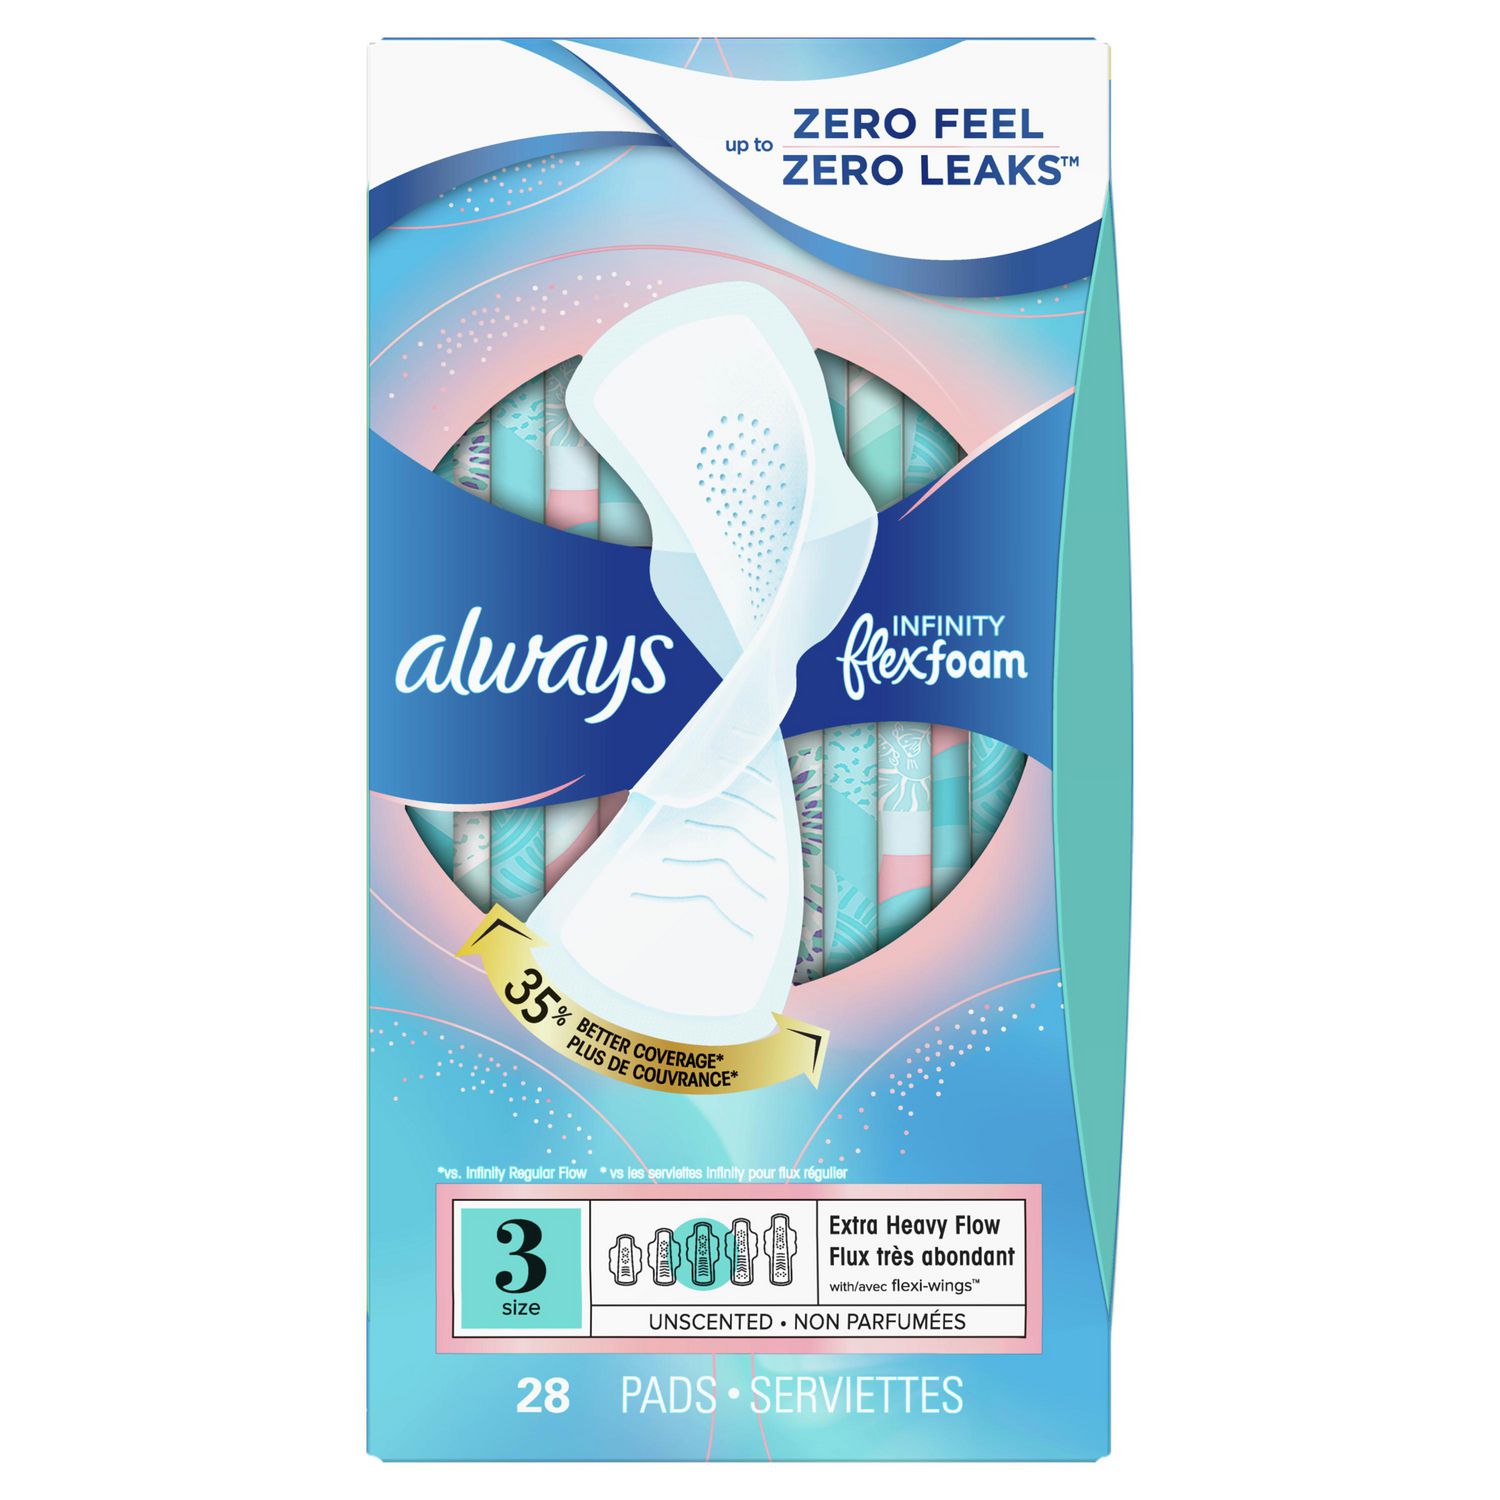 Always Radiant Feminine Pads For Women, Size 3 Extra Heavy Flow Absorbency,  With Flexfoam, With Wings, Unscented, 66 Count